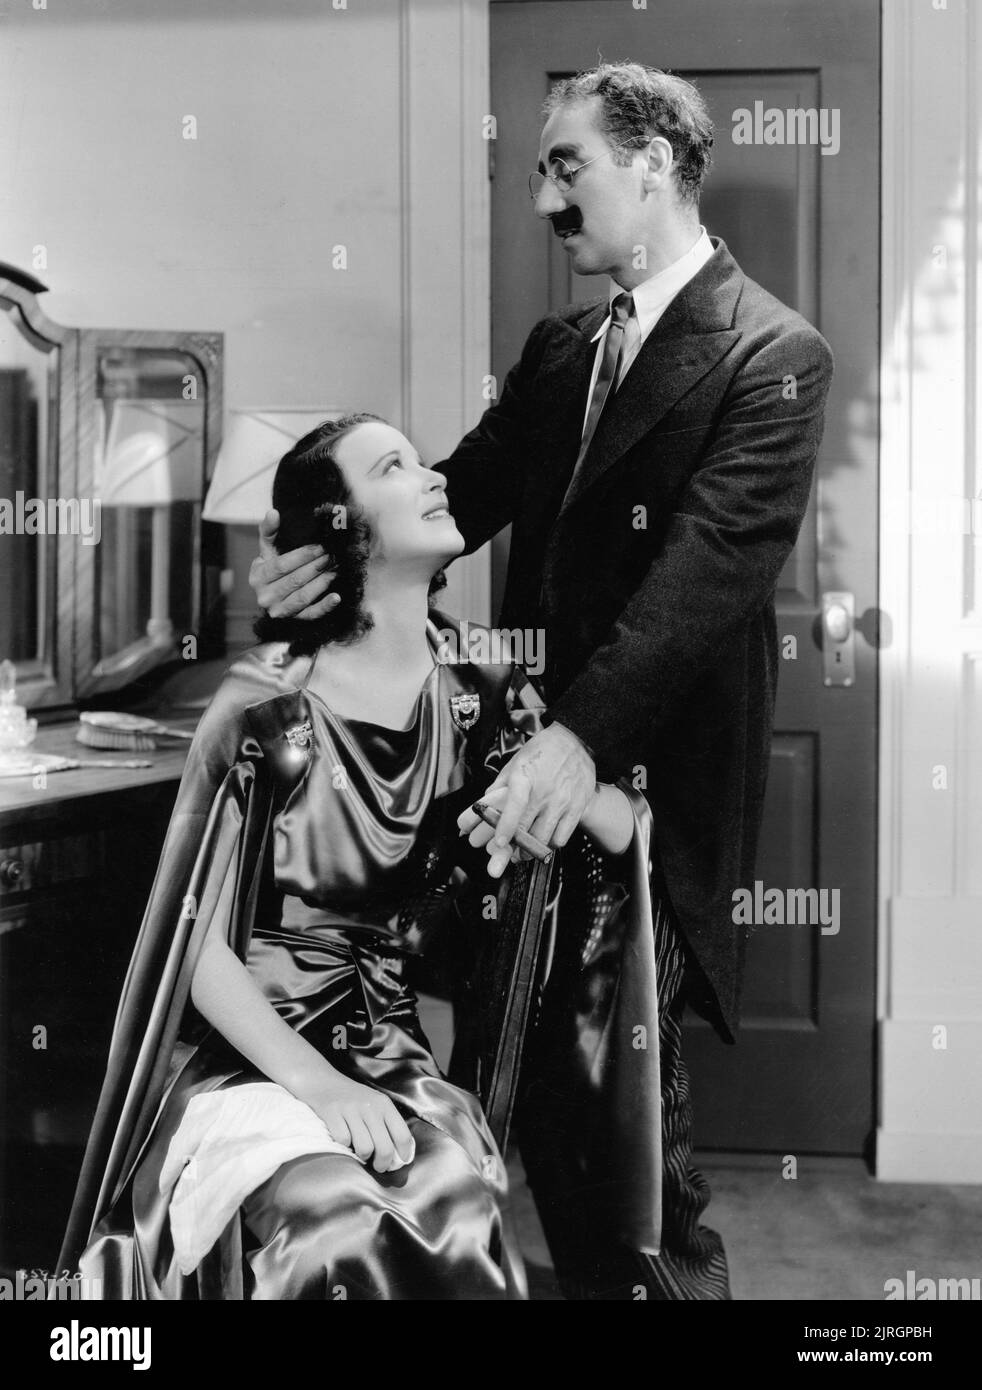 KITTY CARLISLE and GROUCHO MARX in A NIGHT AT THE OPERA 1935 director SAM WOOD writers George S. Kaufman and Morrie Ryskind producer Irving Thalberg Metro Goldwyn Mayer Stock Photo